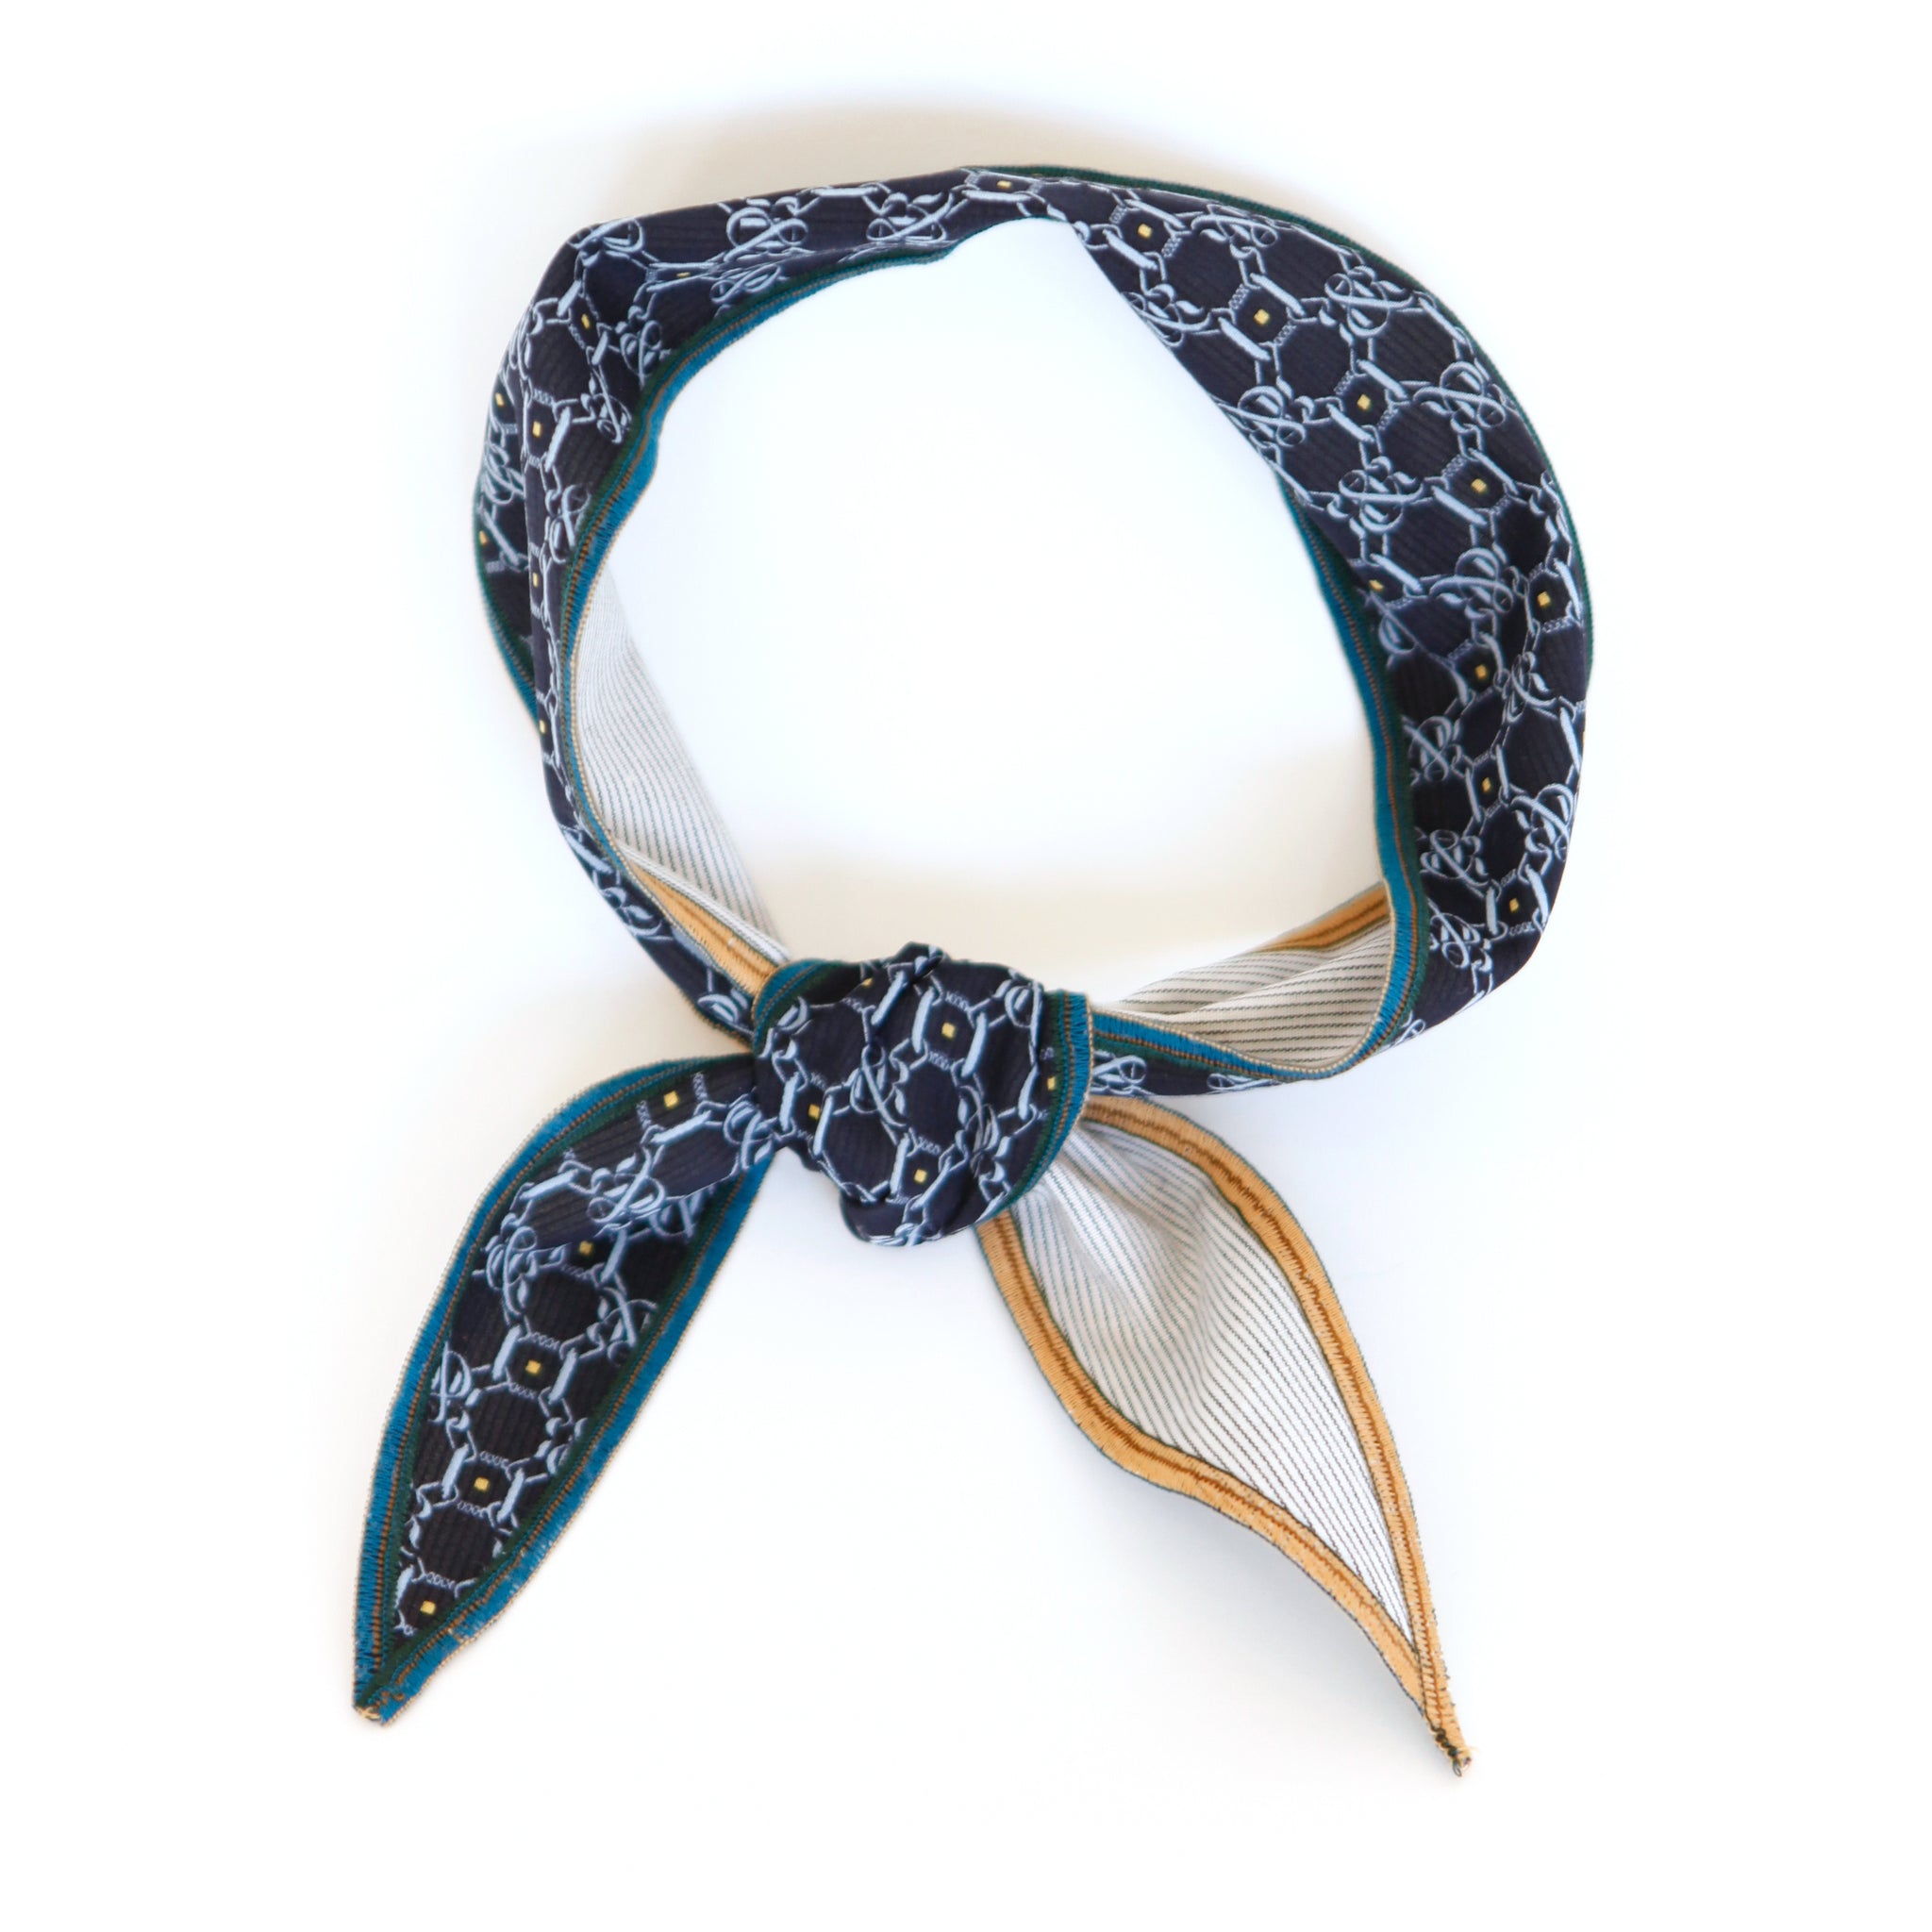 The Dandy - Navy Foulard + Charcoal Stripe - The Little Project 